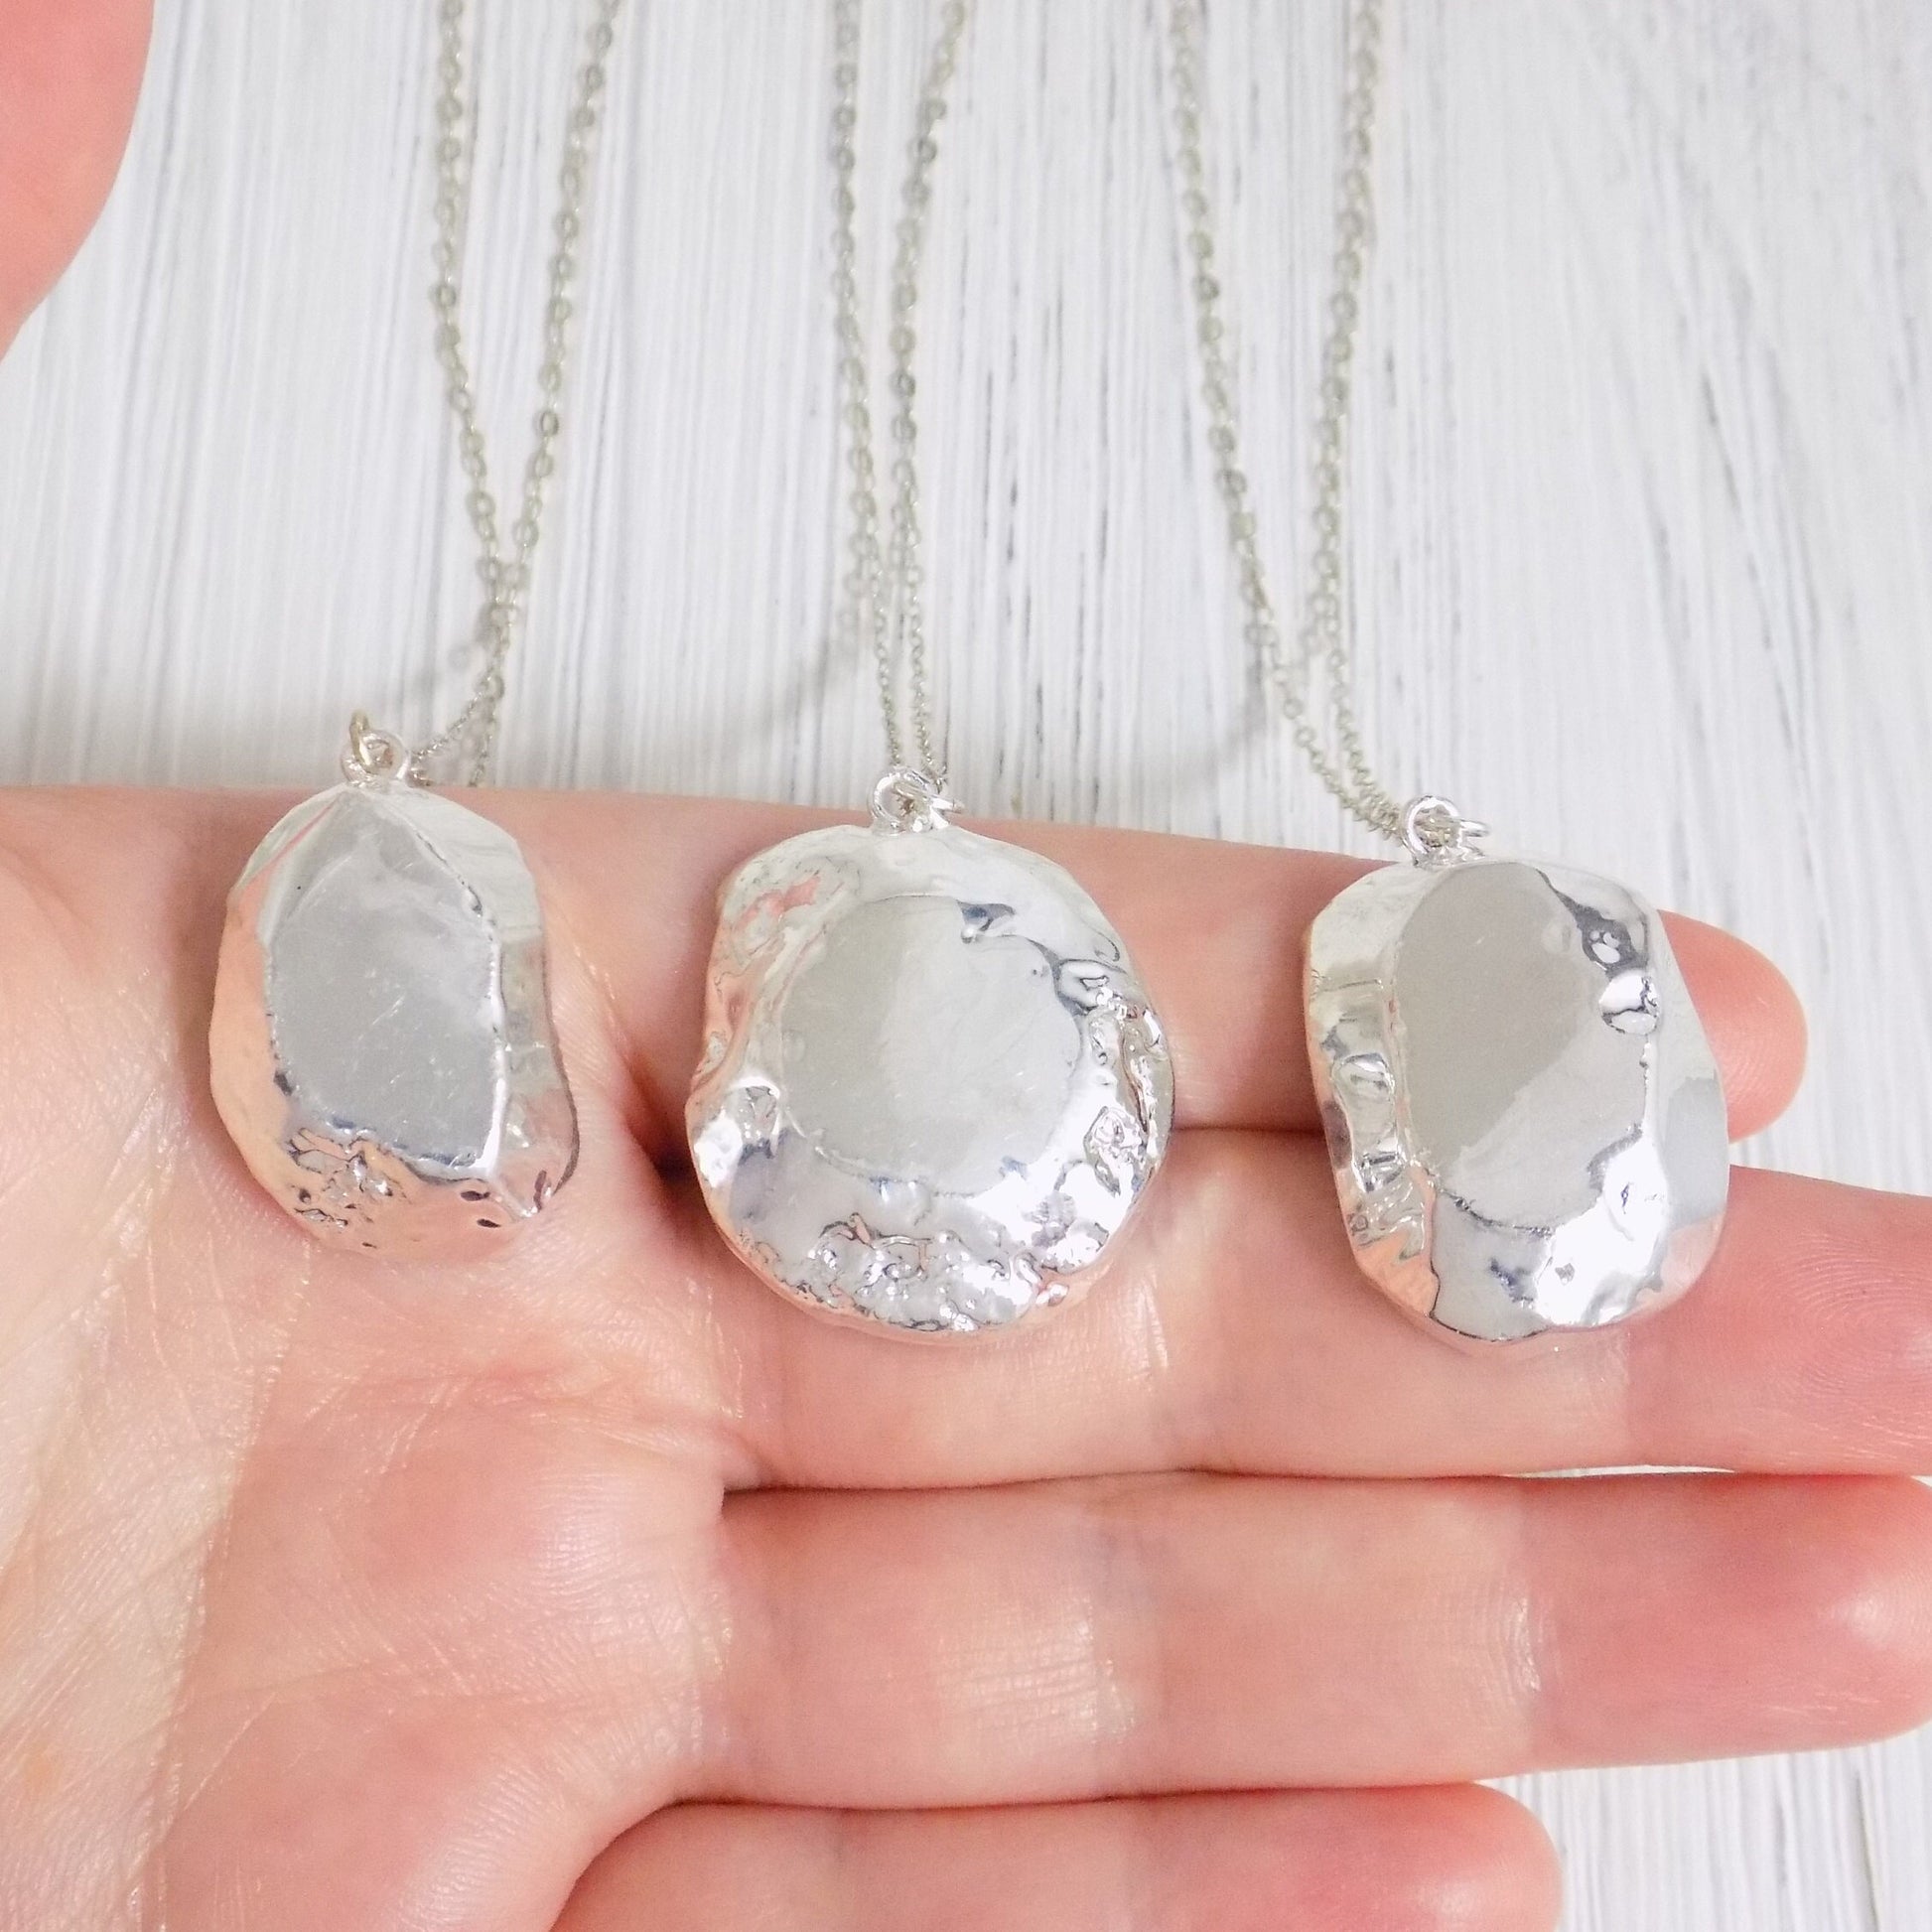 Boho Small Geode Necklace Silver - Blue Raw Stone Necklace